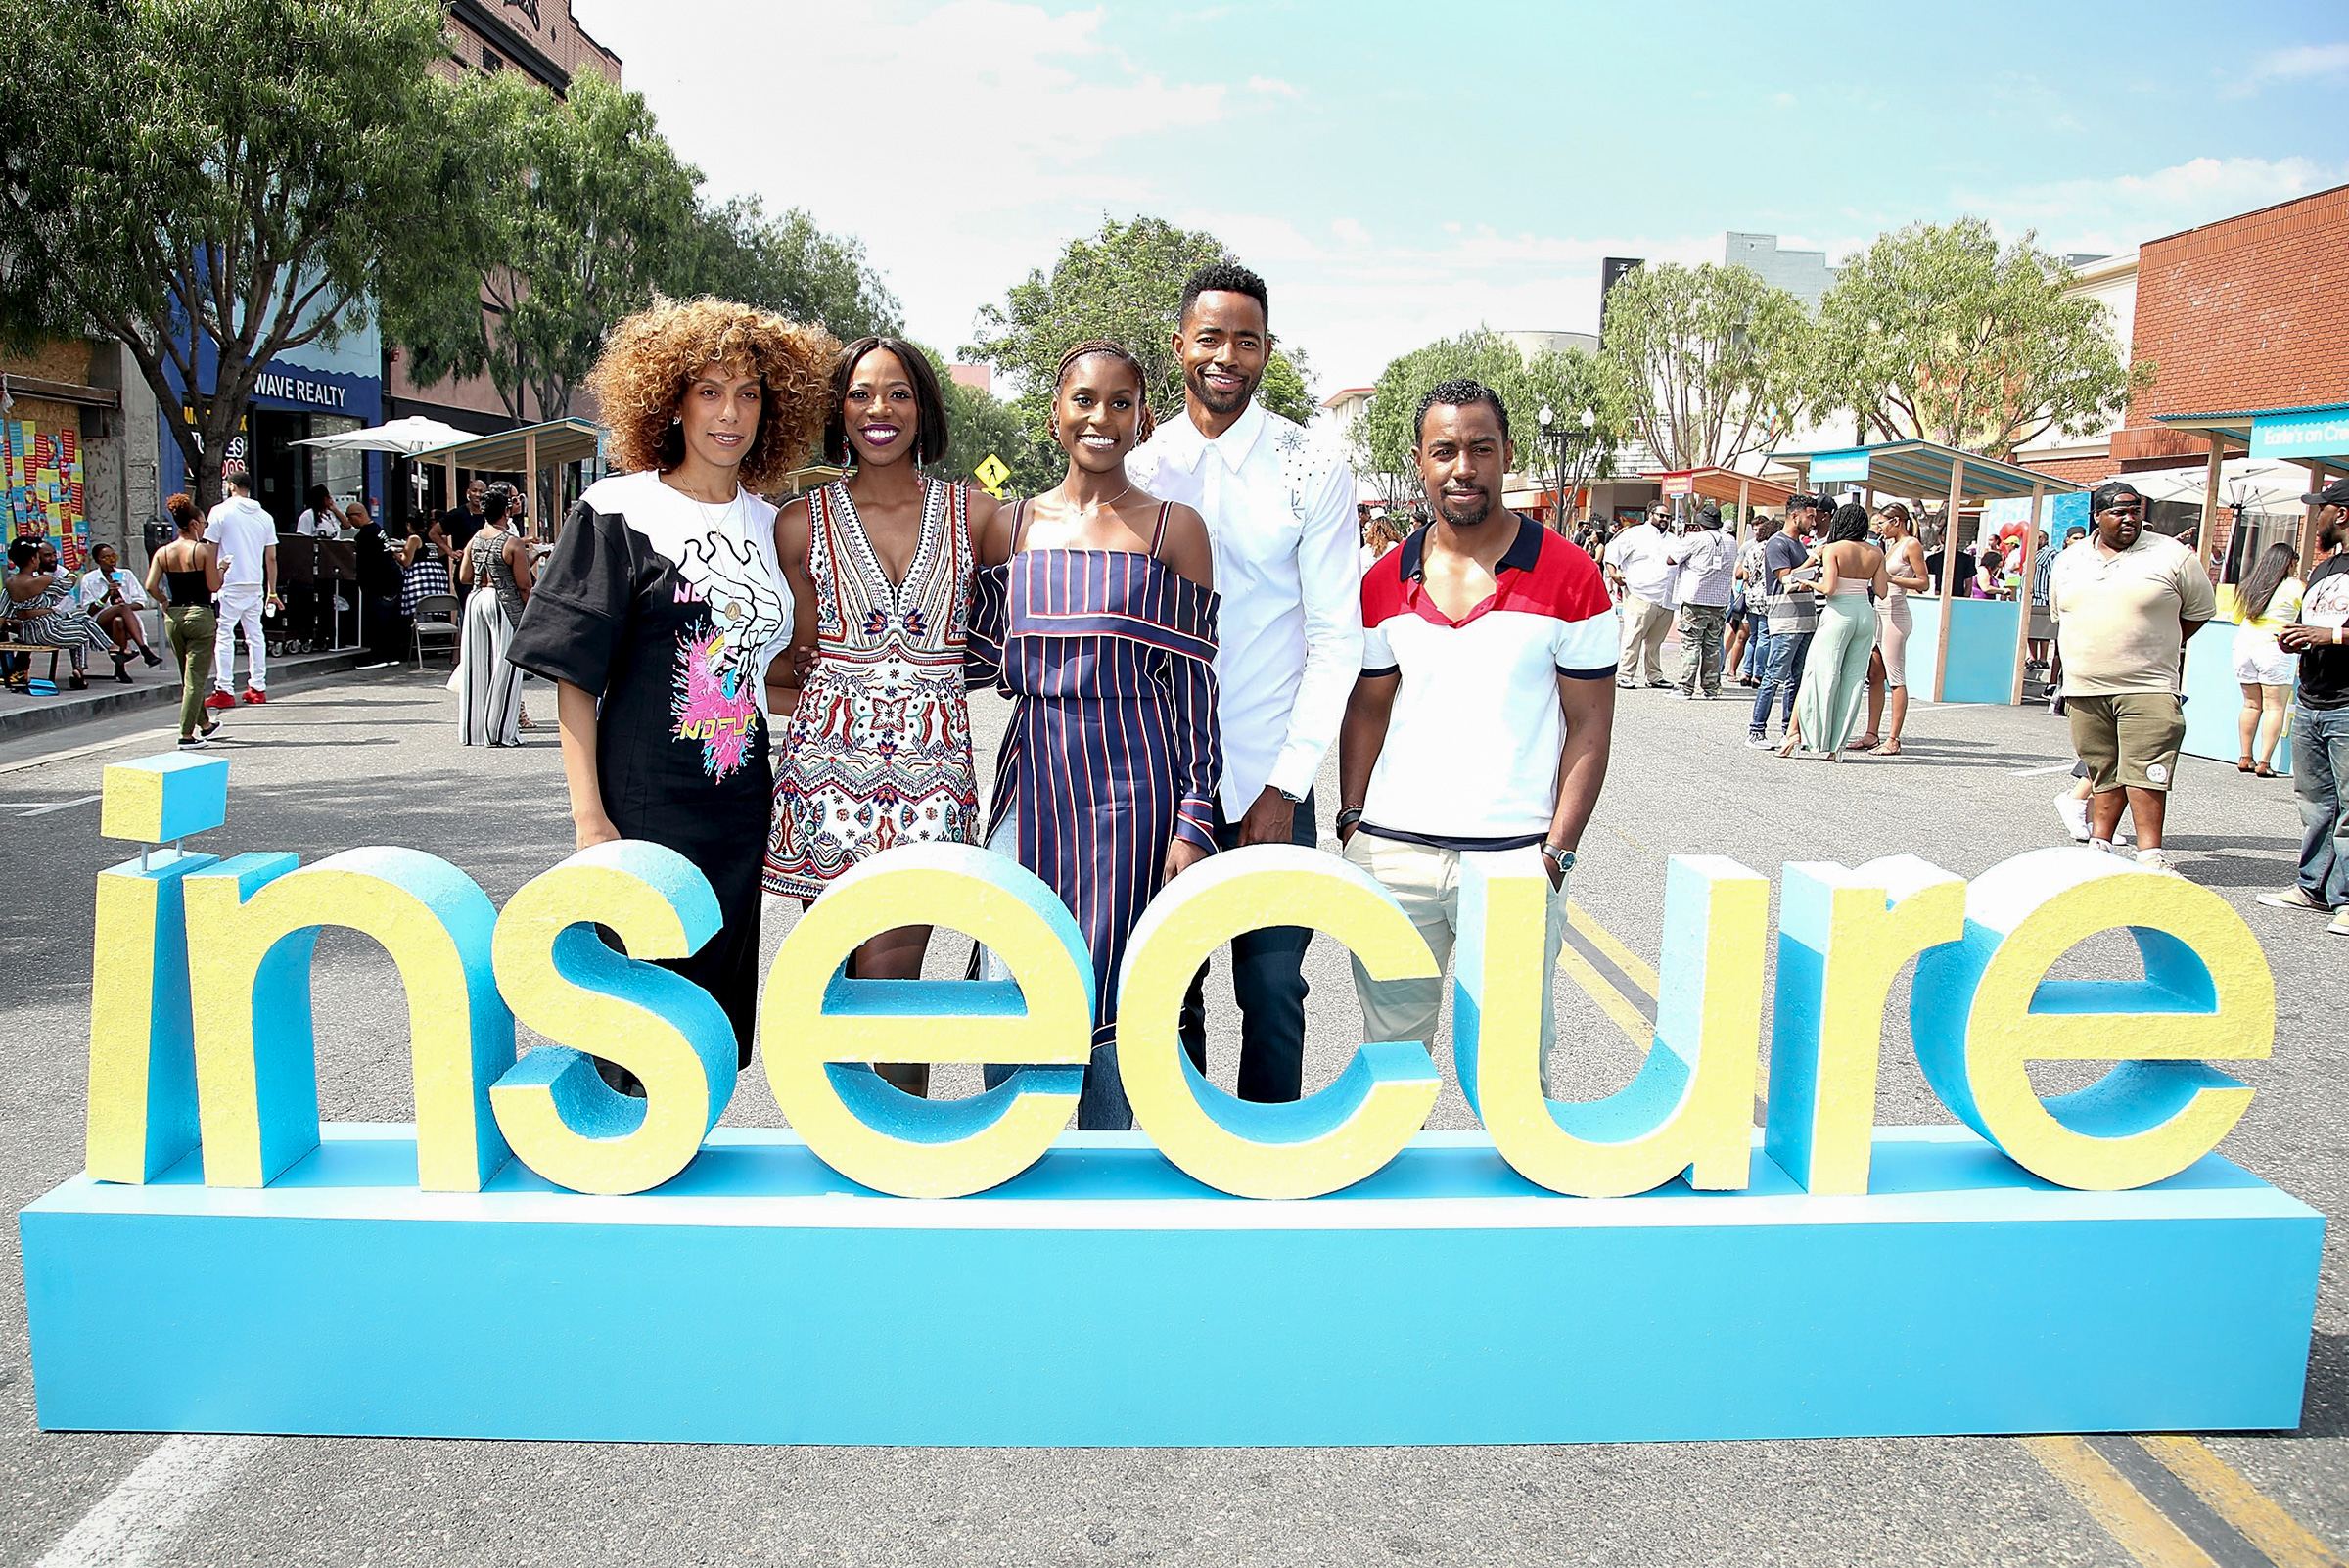 From left: Director Melina Matsoukas, Yvonne Orji, Issa Rae, Jay Ellis and Executive Producer Prentice Penny celebrate the second season of Insecure with a block party in Inglewood, Calif. on July 15, 2017. (Randy Shropshire—Getty Images/HBO)